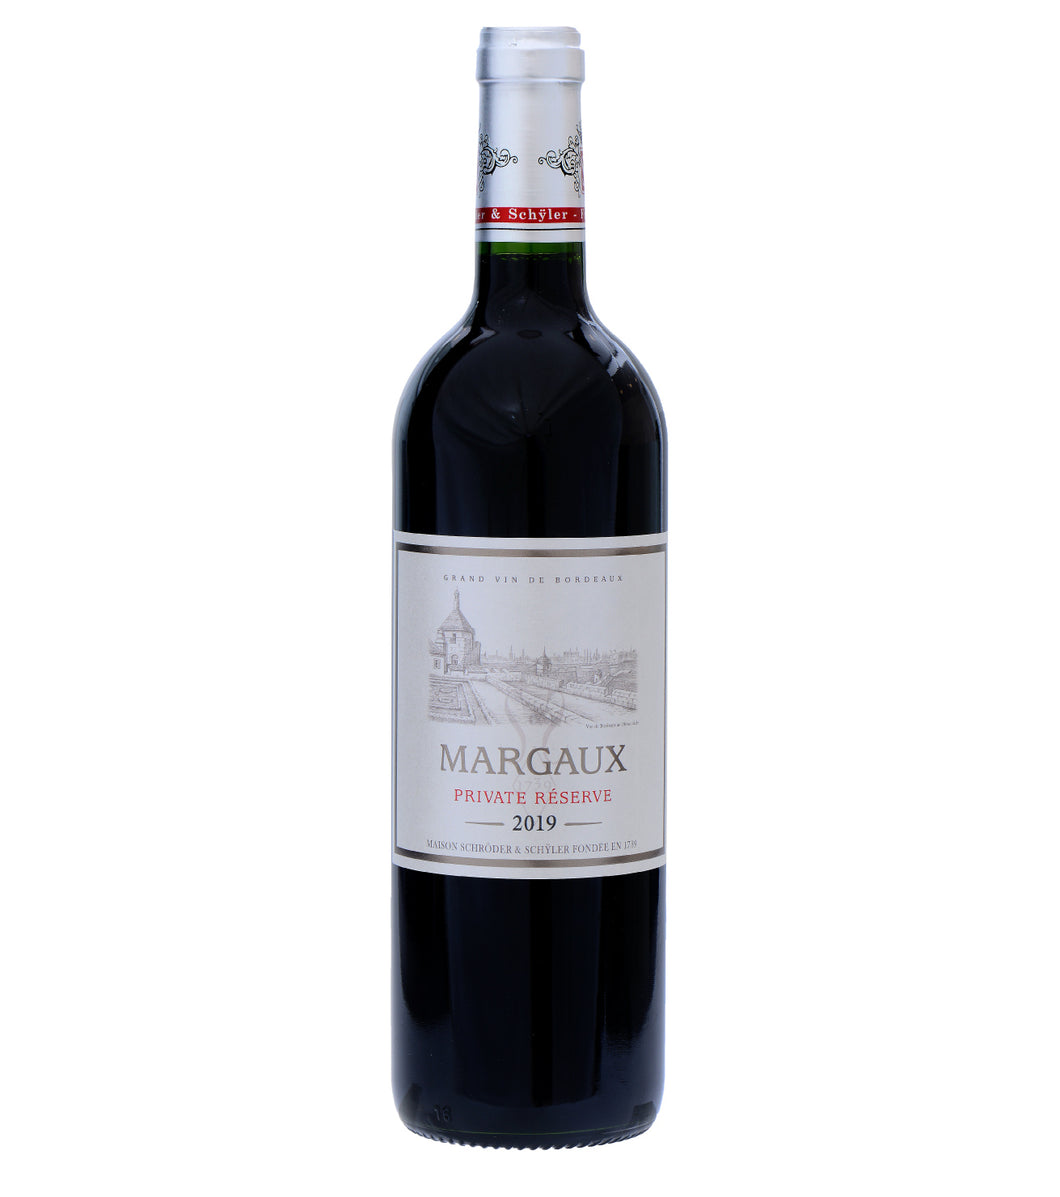 Margaux Private Reserve 2019